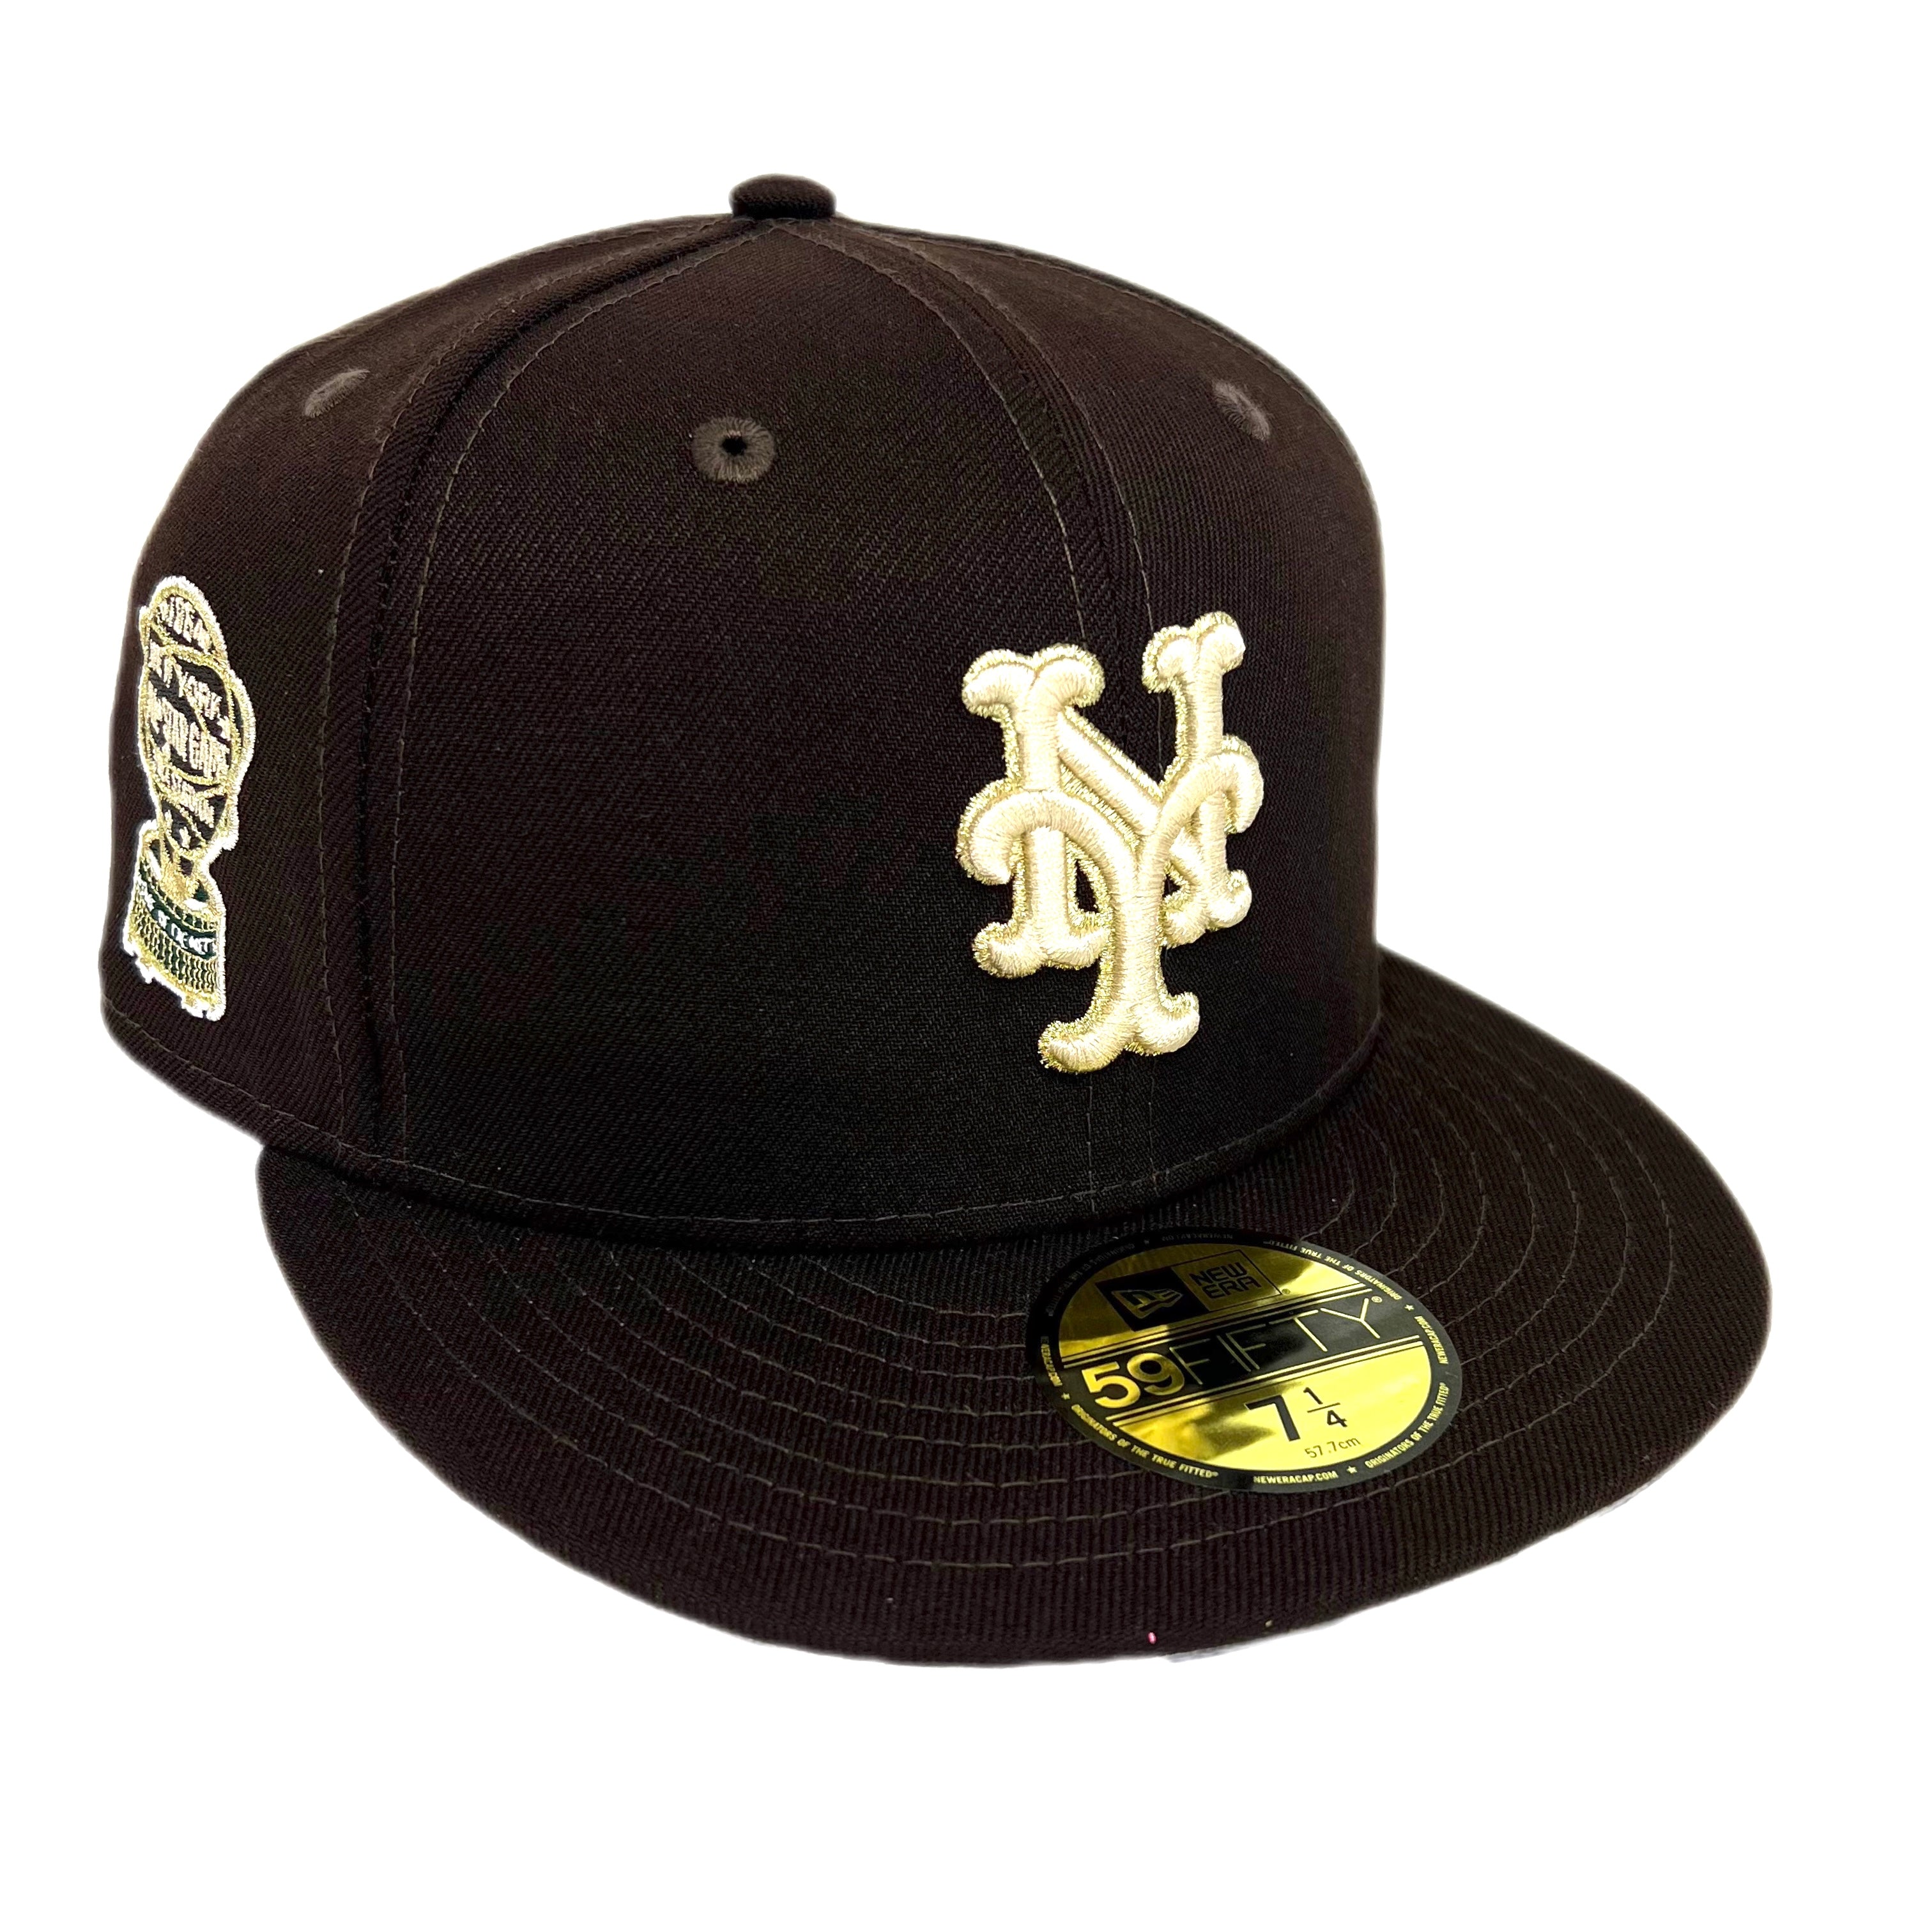 NEW YORK METS (BROWN) (1964 ALLSTARGAME) NEW ERA 59FIFTY FITTED